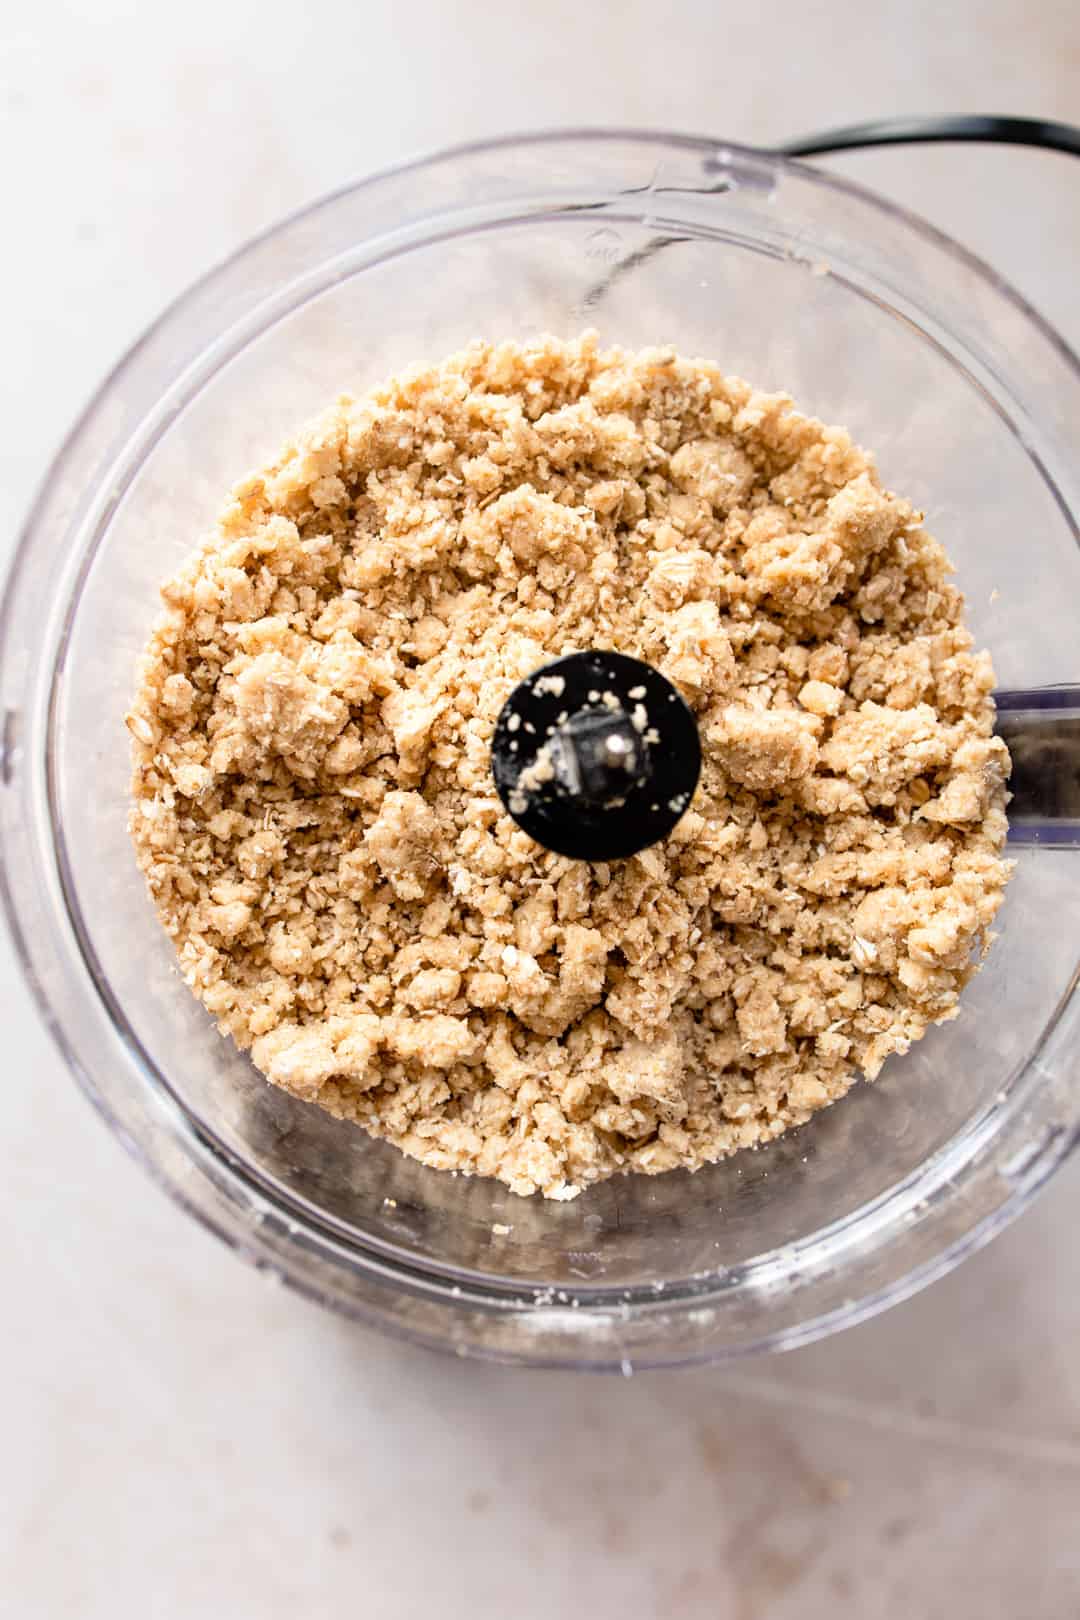 Crumble topping being mixed in a food processor.